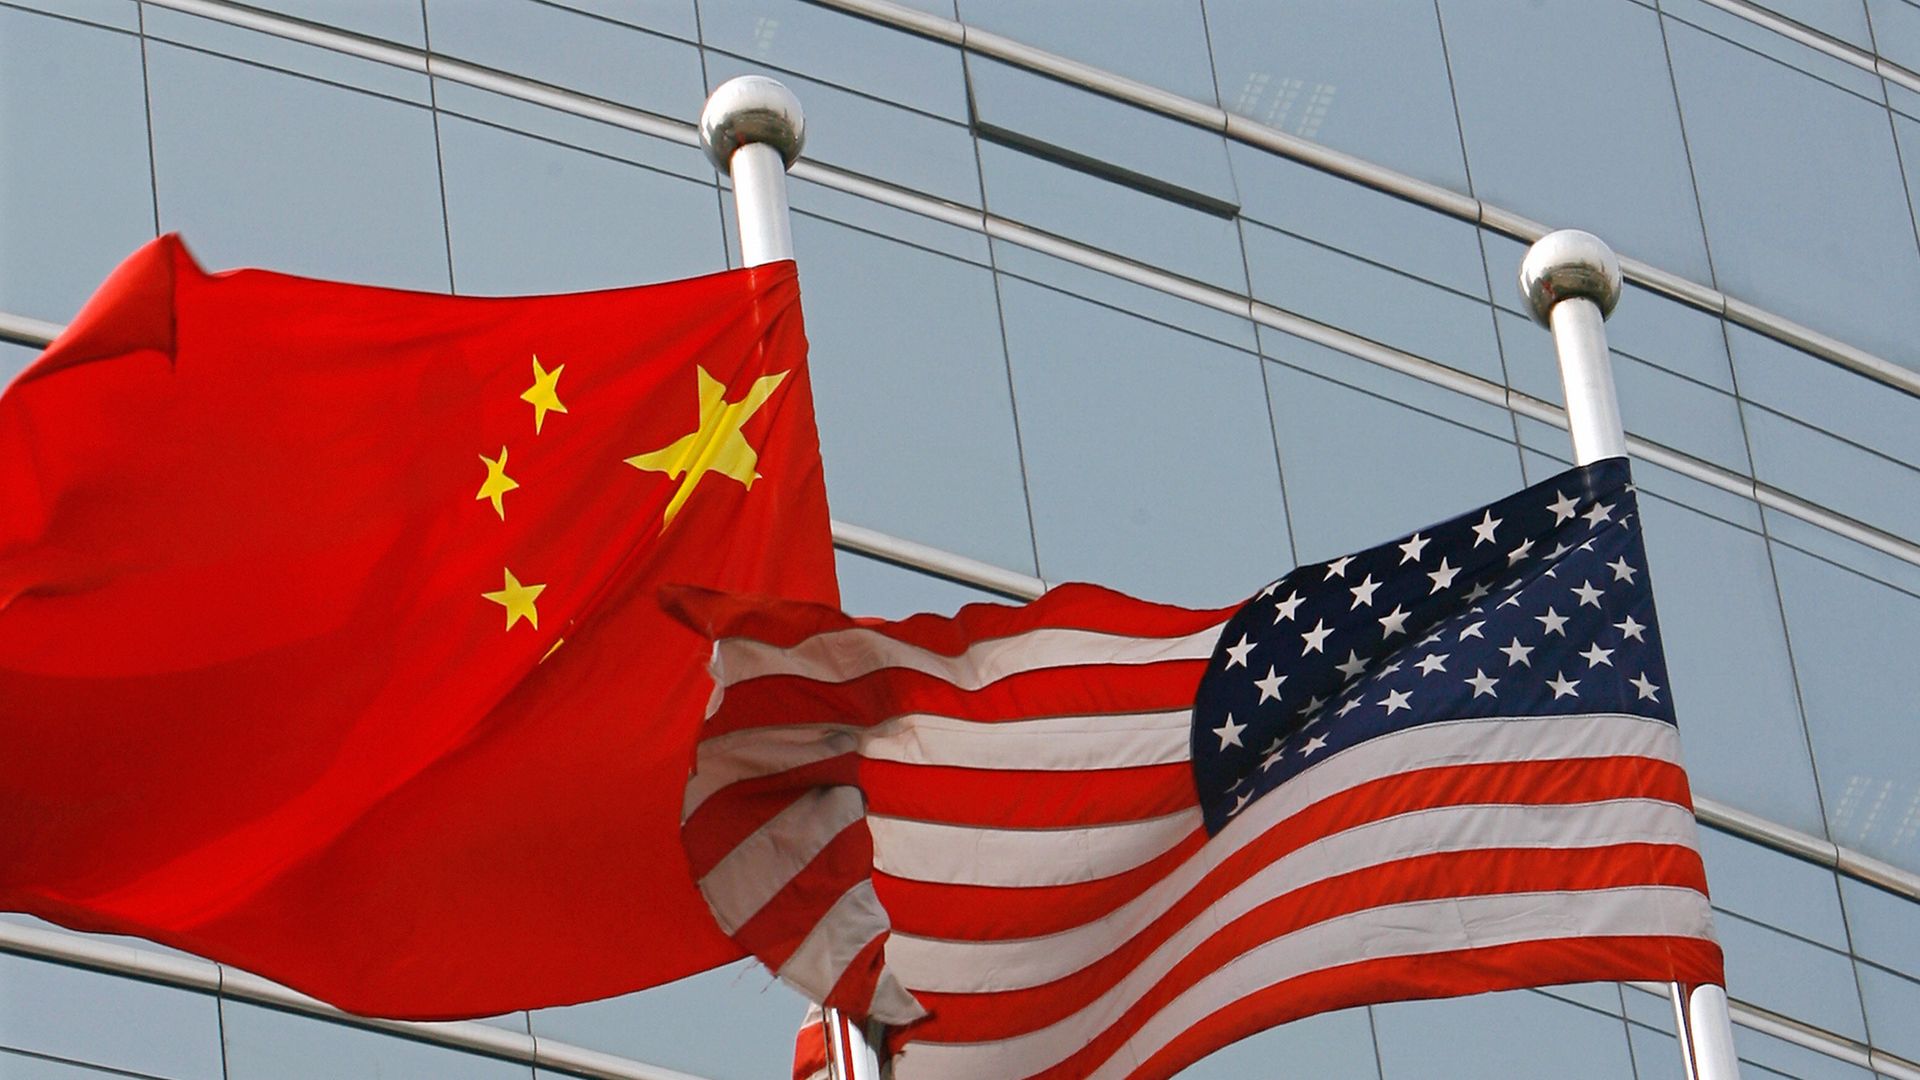 U.S. and Chinese flags fly side by side